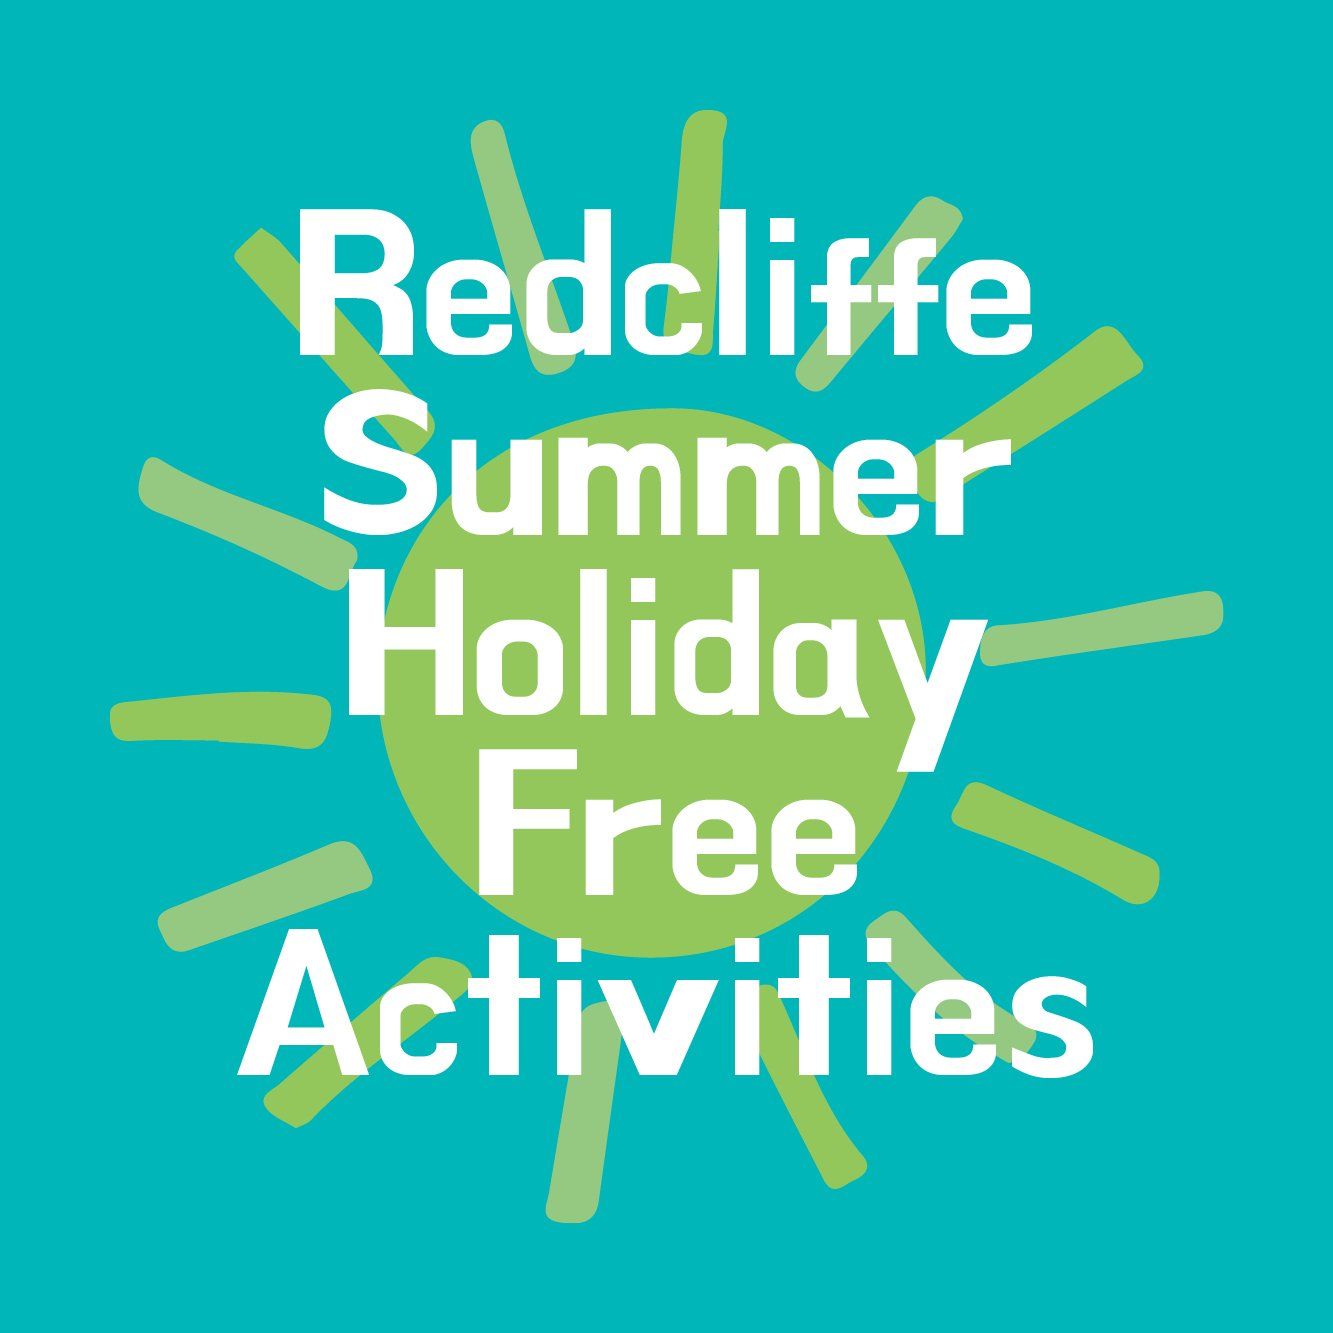 redcliffe-summer-holiday-activities